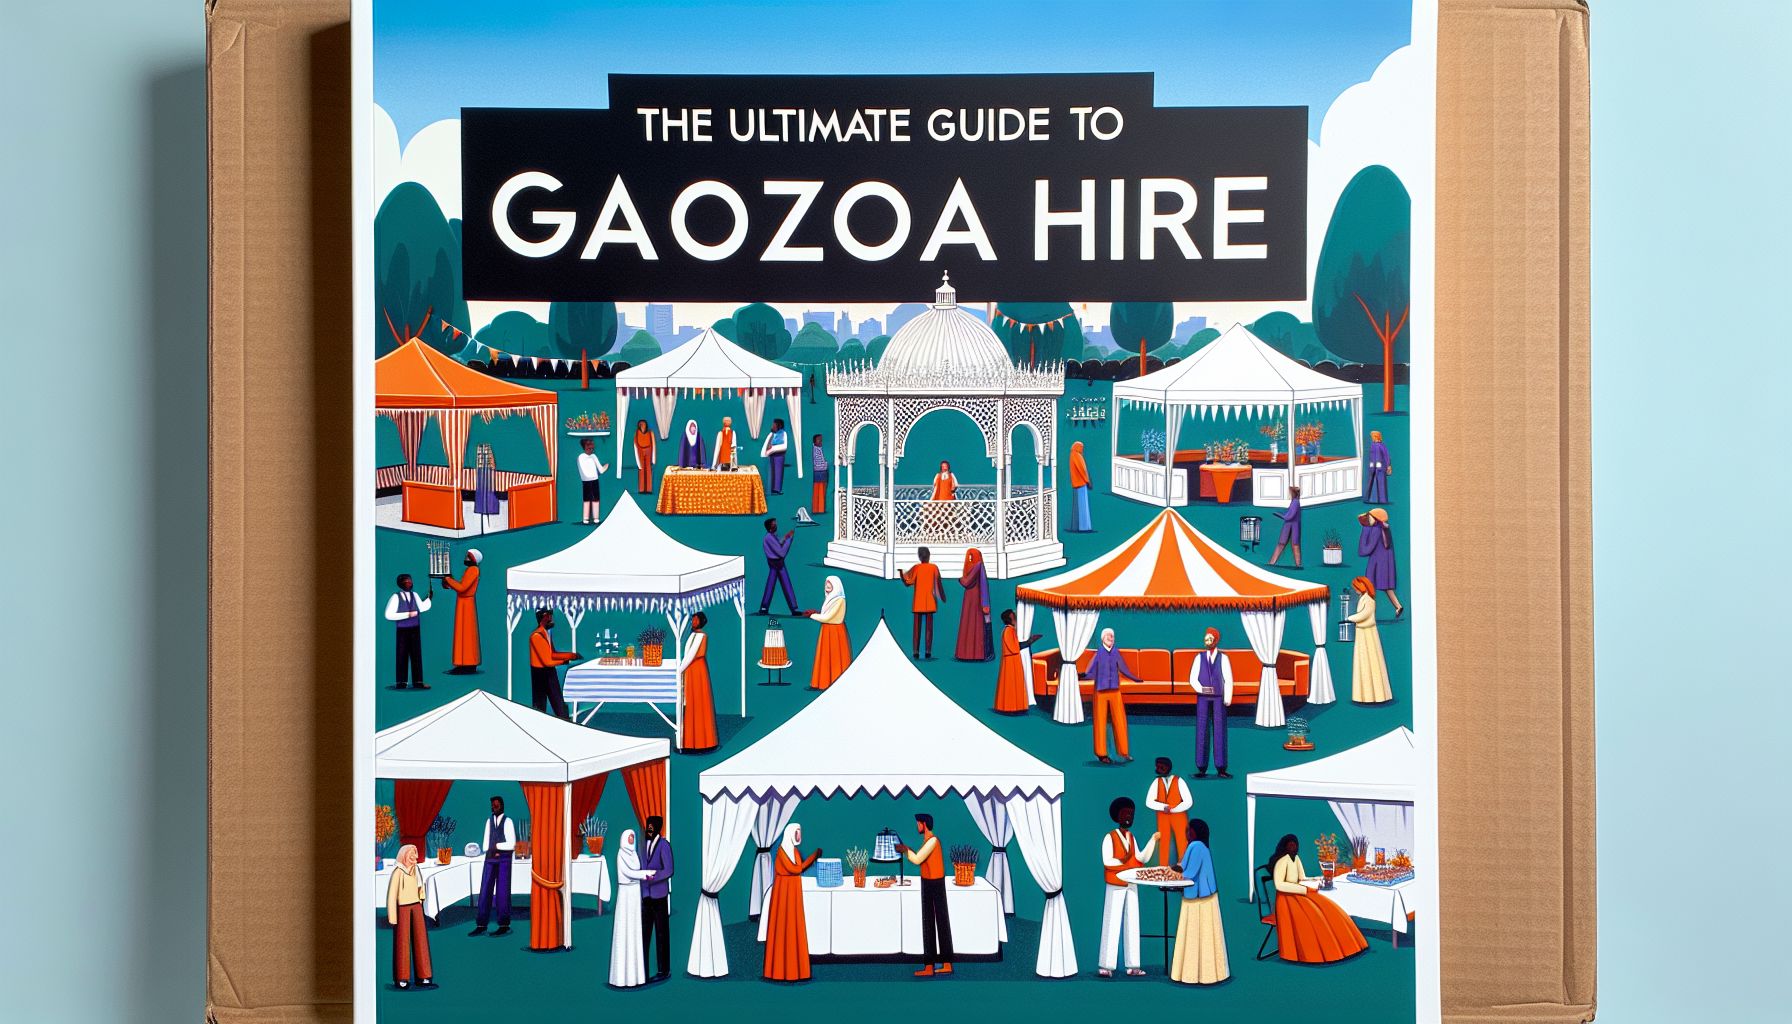 The Ultimate Guide to Gazebo Hire